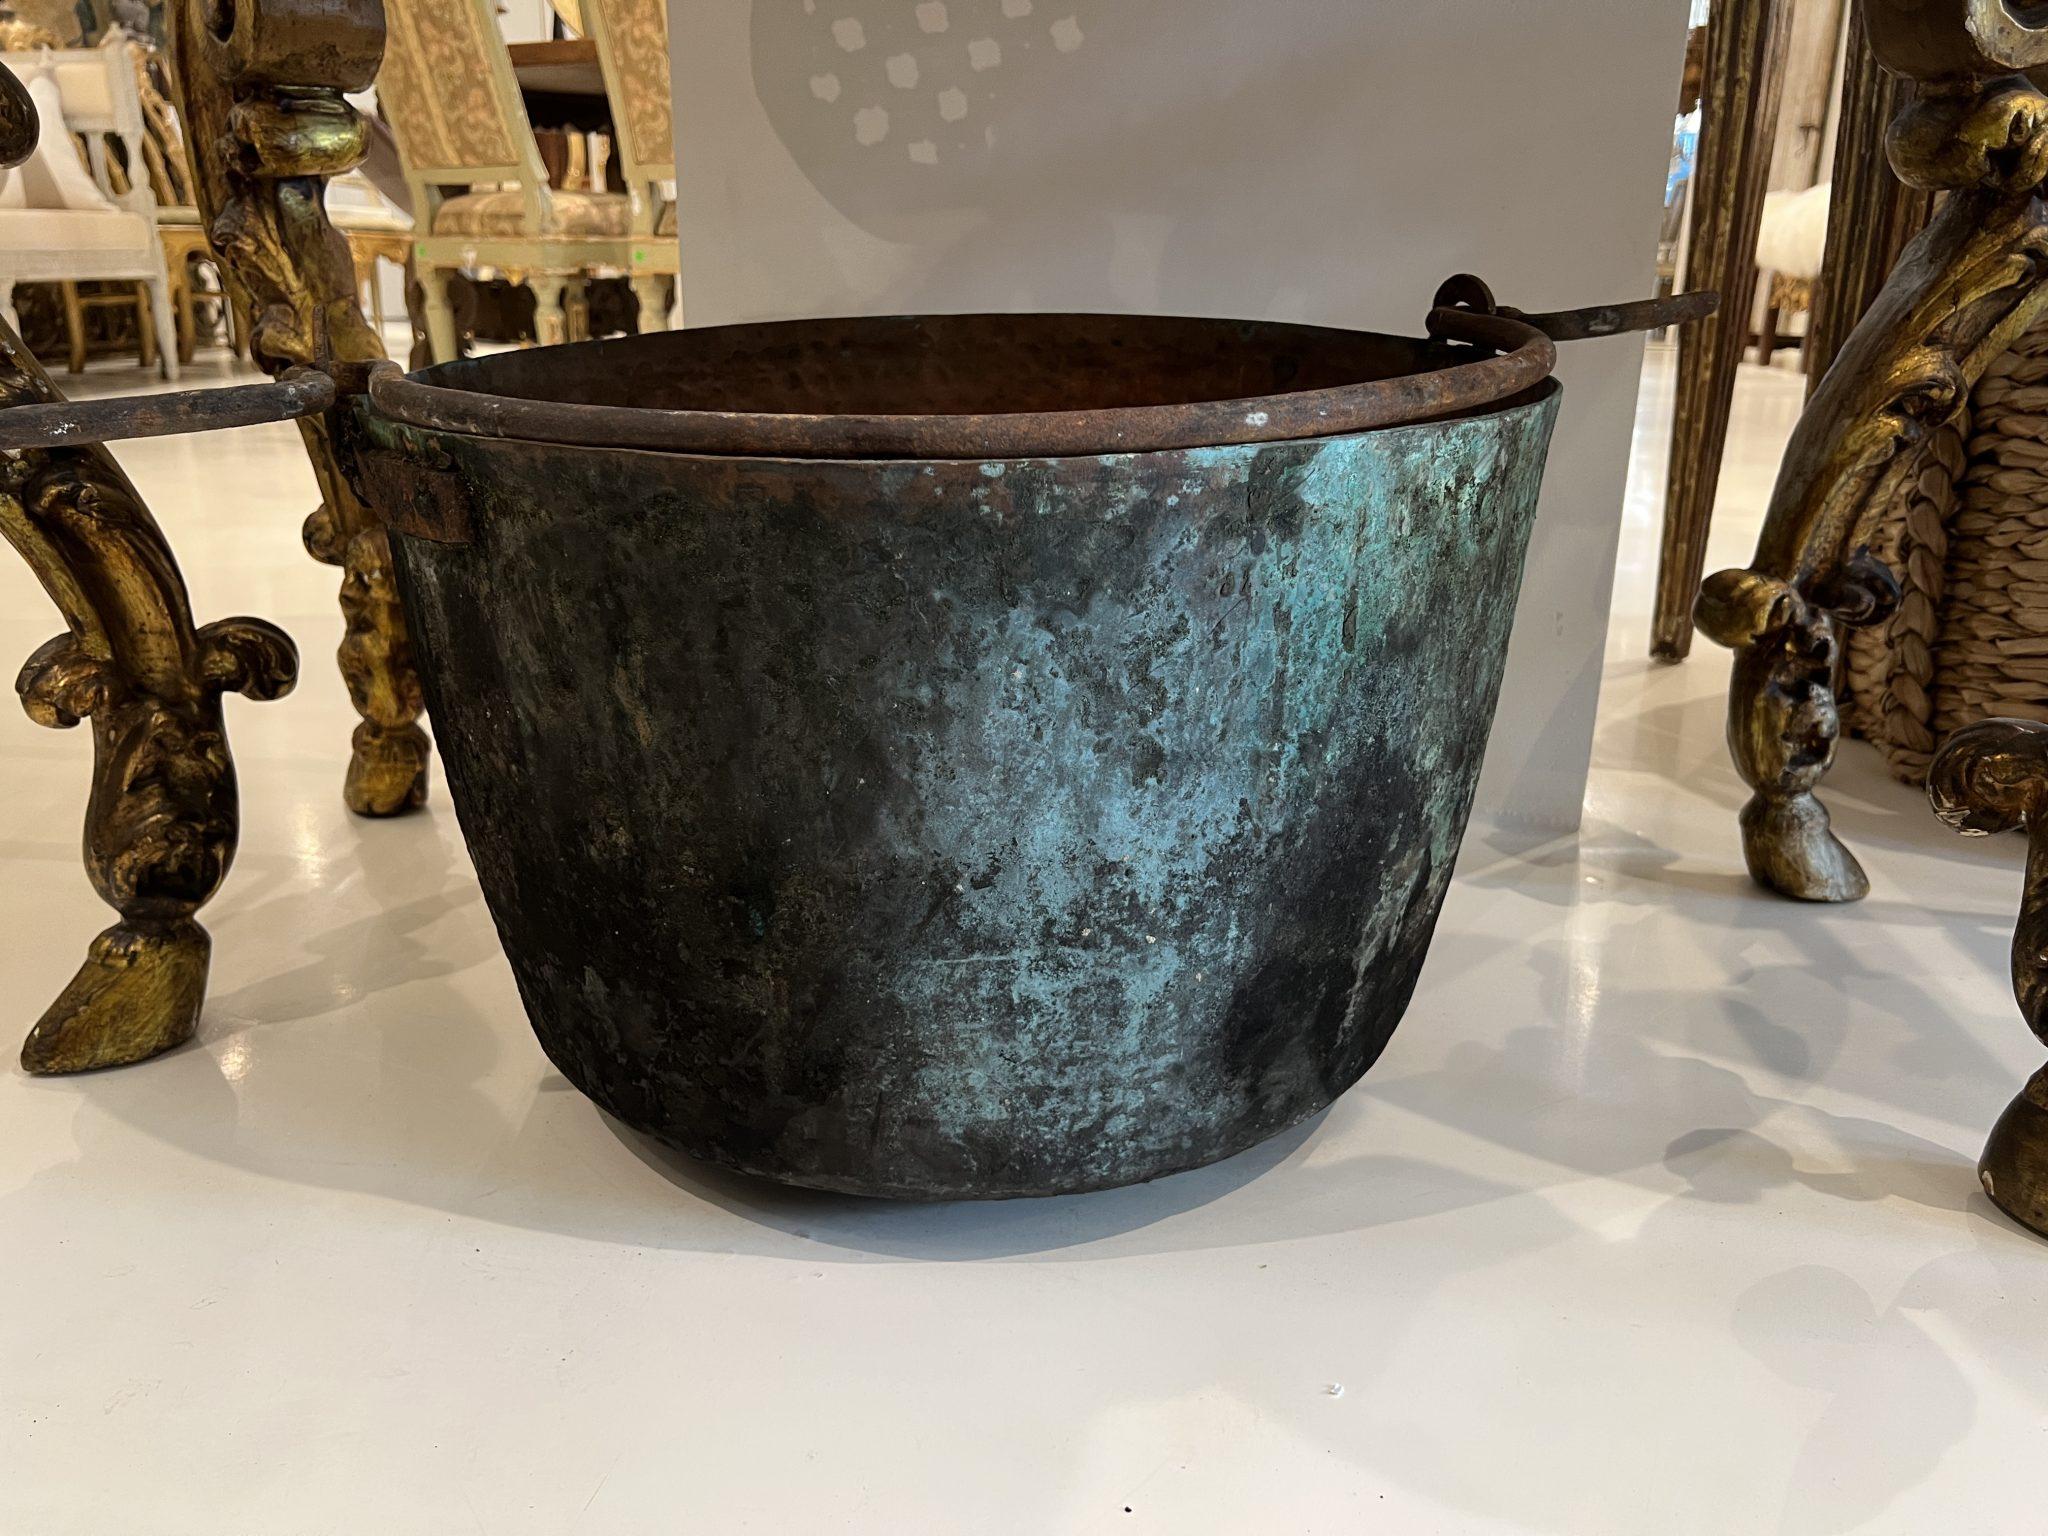 Large heavily patinated copper kettle with handle. Could be used as a vessel for a large flower arrangement or as a receptacle for wood next to the fireplace.